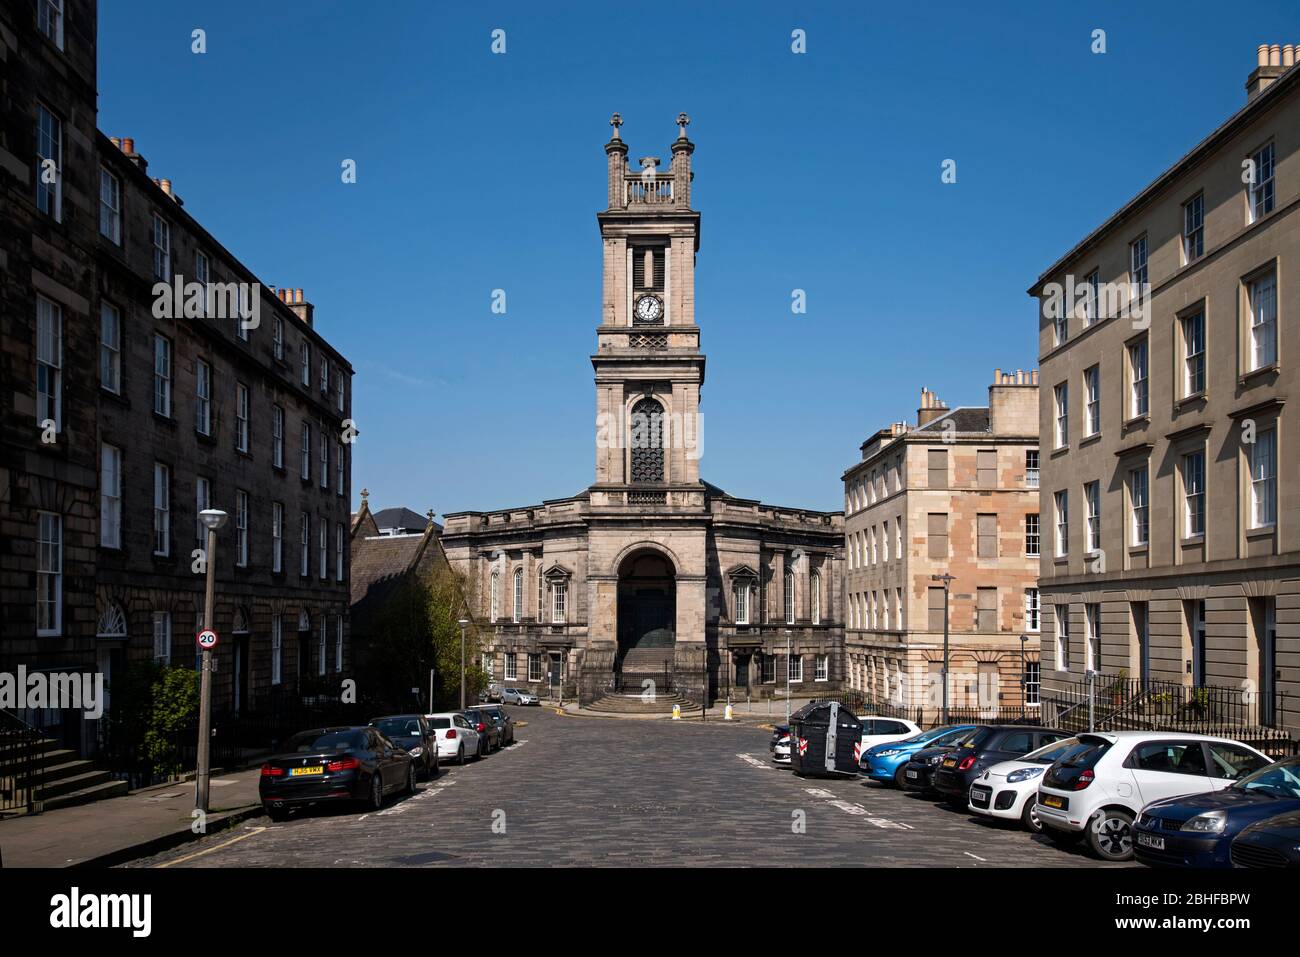 St Stephen's Church designed by architect William Henry Playfair in the New Town area of Edinburgh, Scotland, UK. Stock Photo